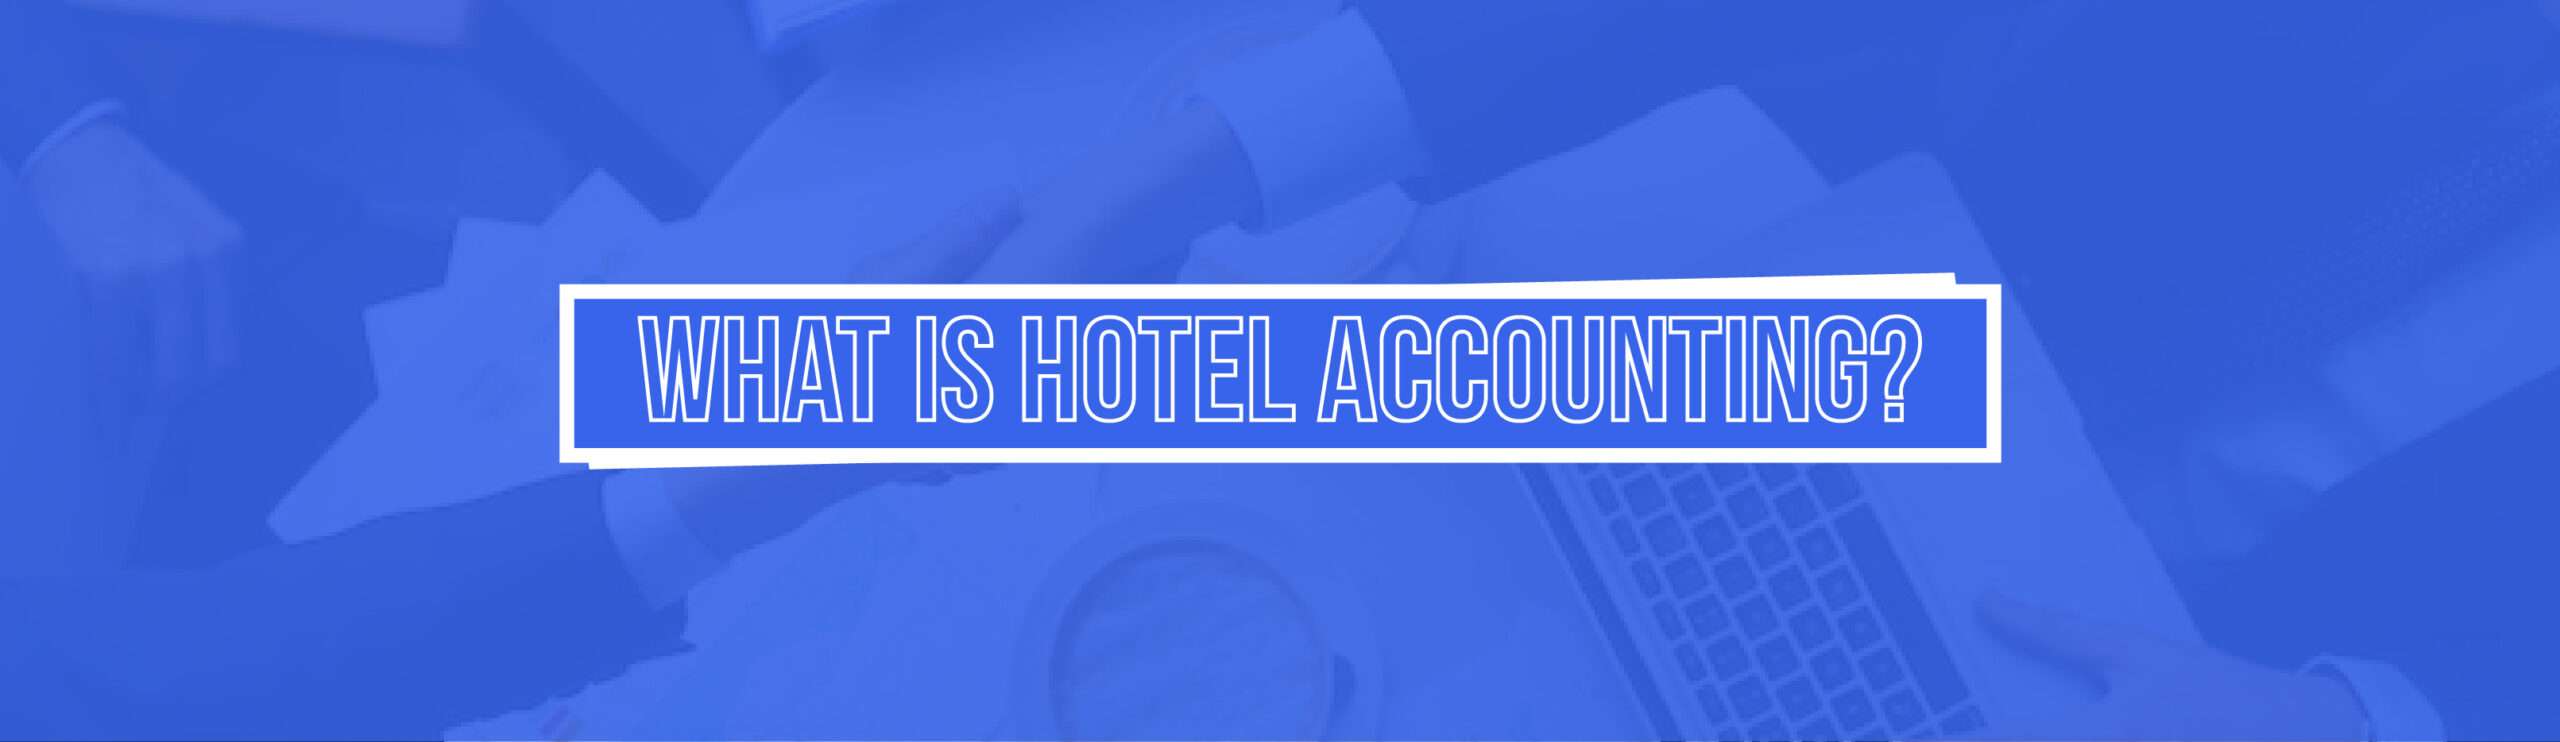 What is Hotel Accounting